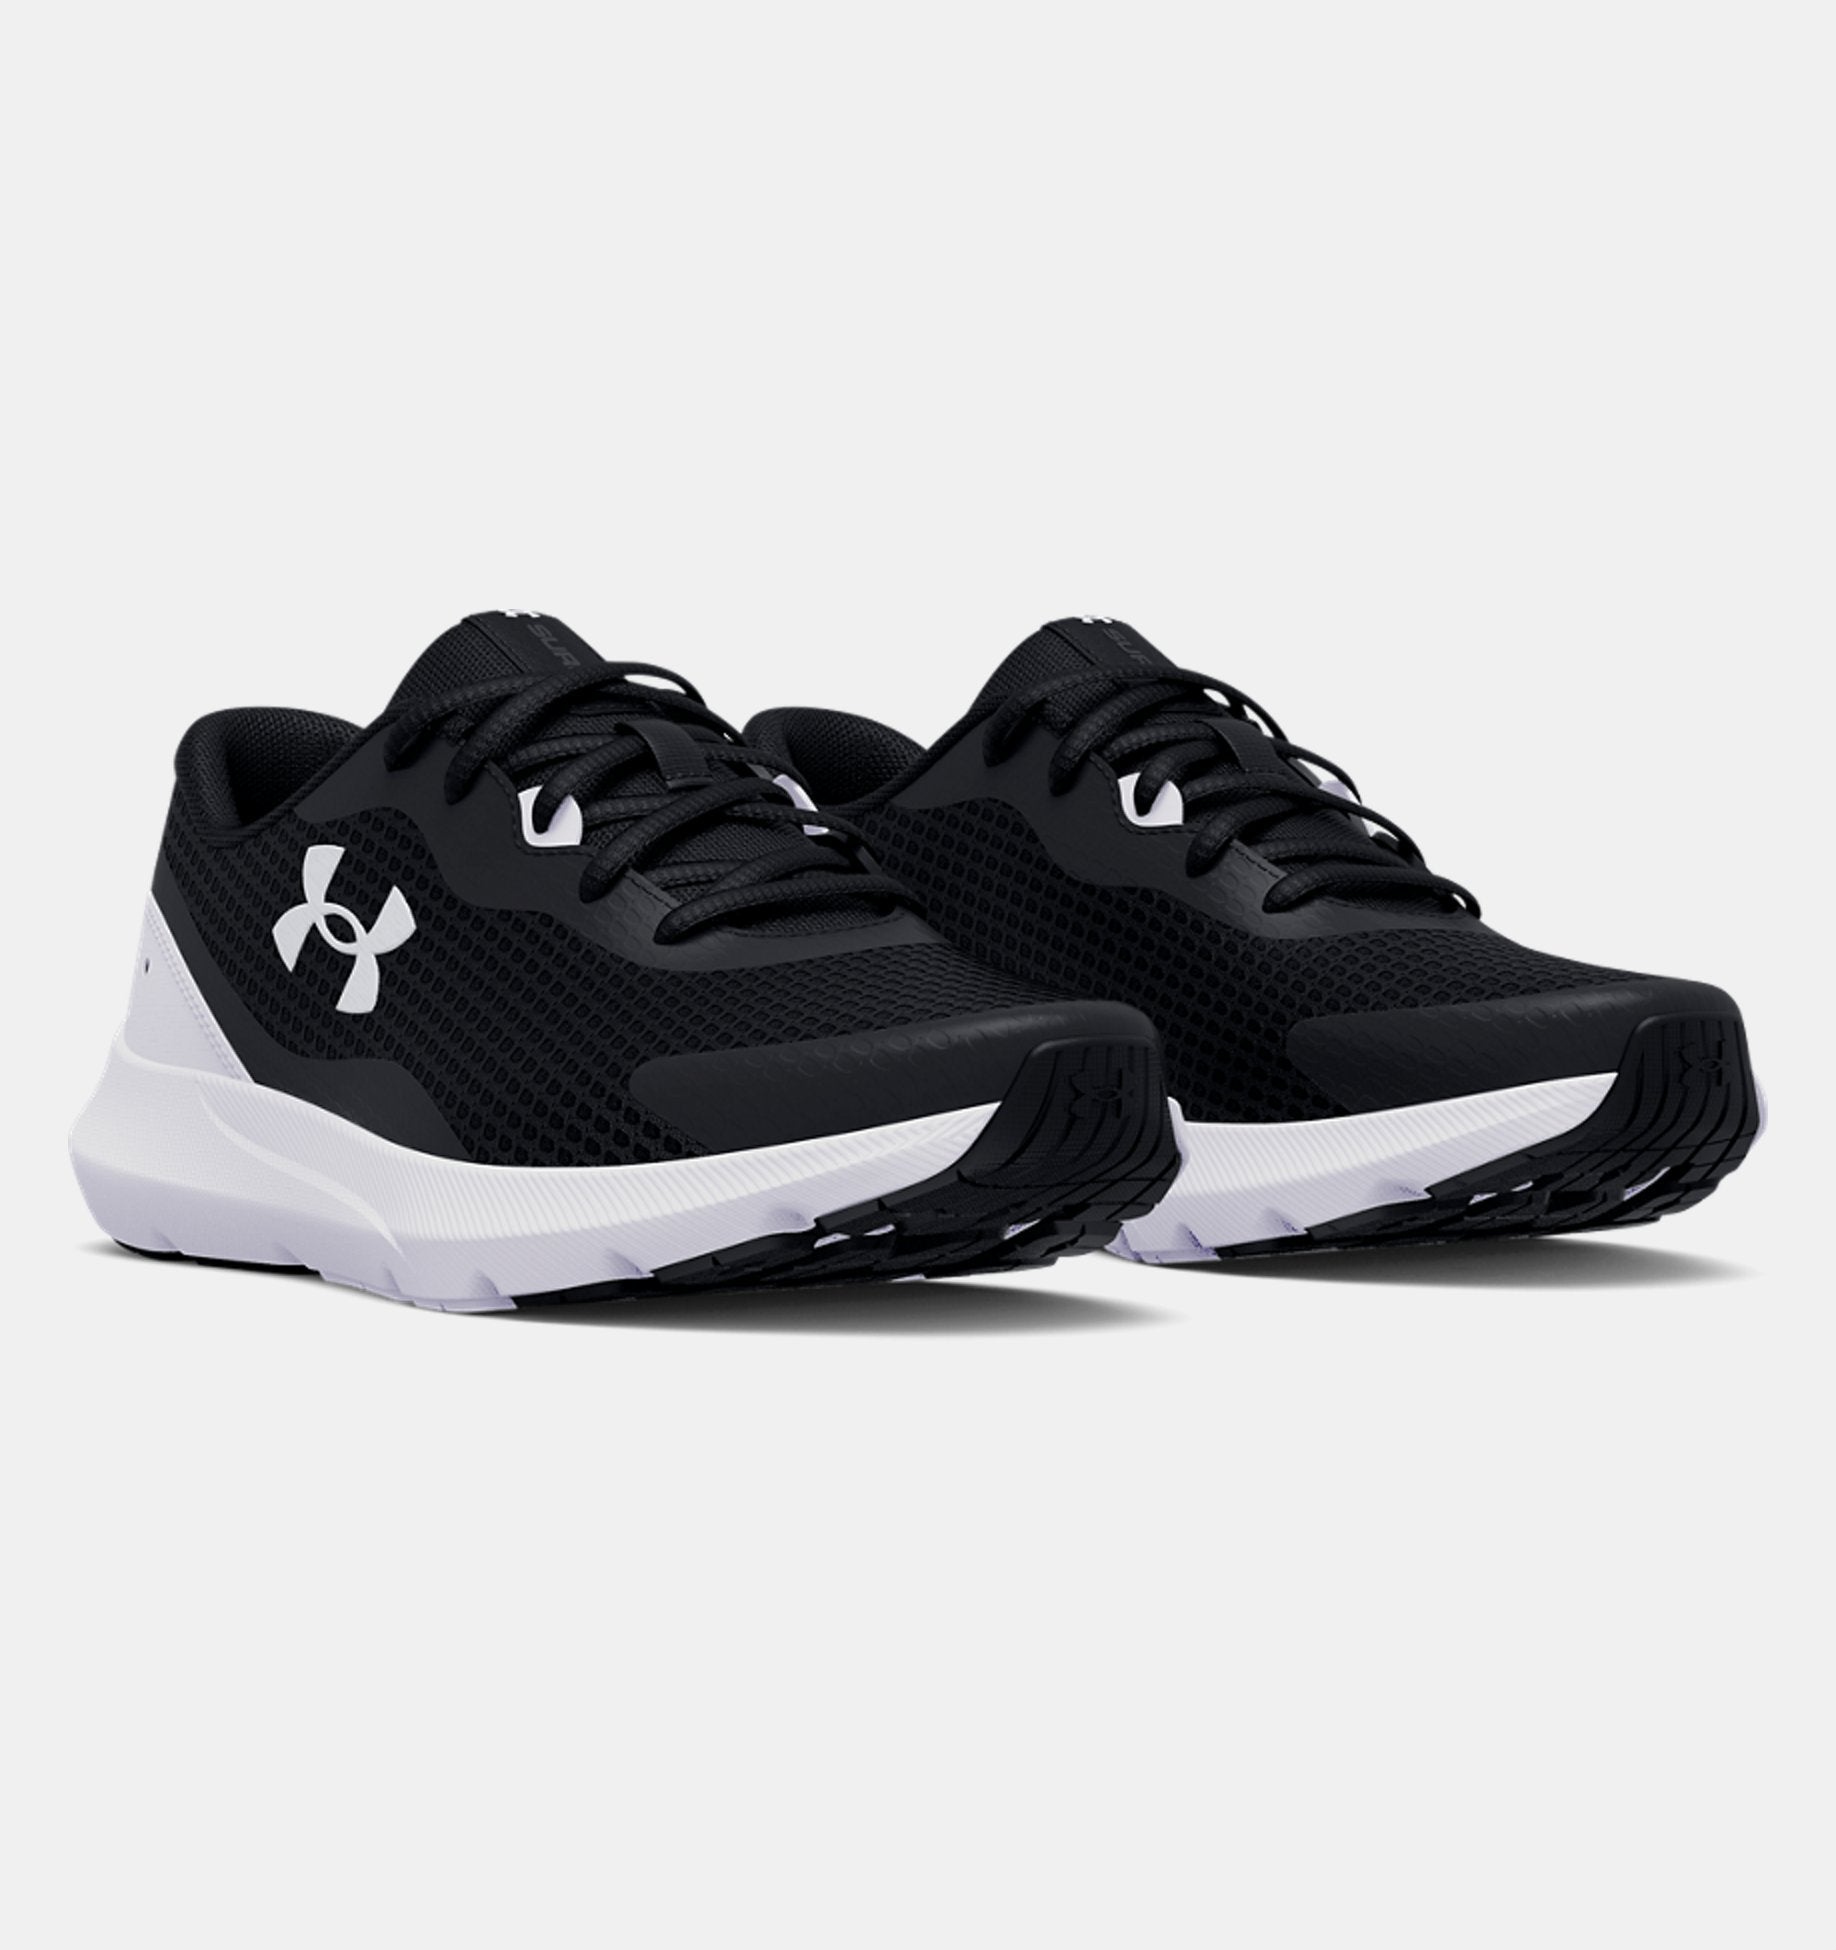 Under Armour Women's Surge 3 Running Shoes 3024894